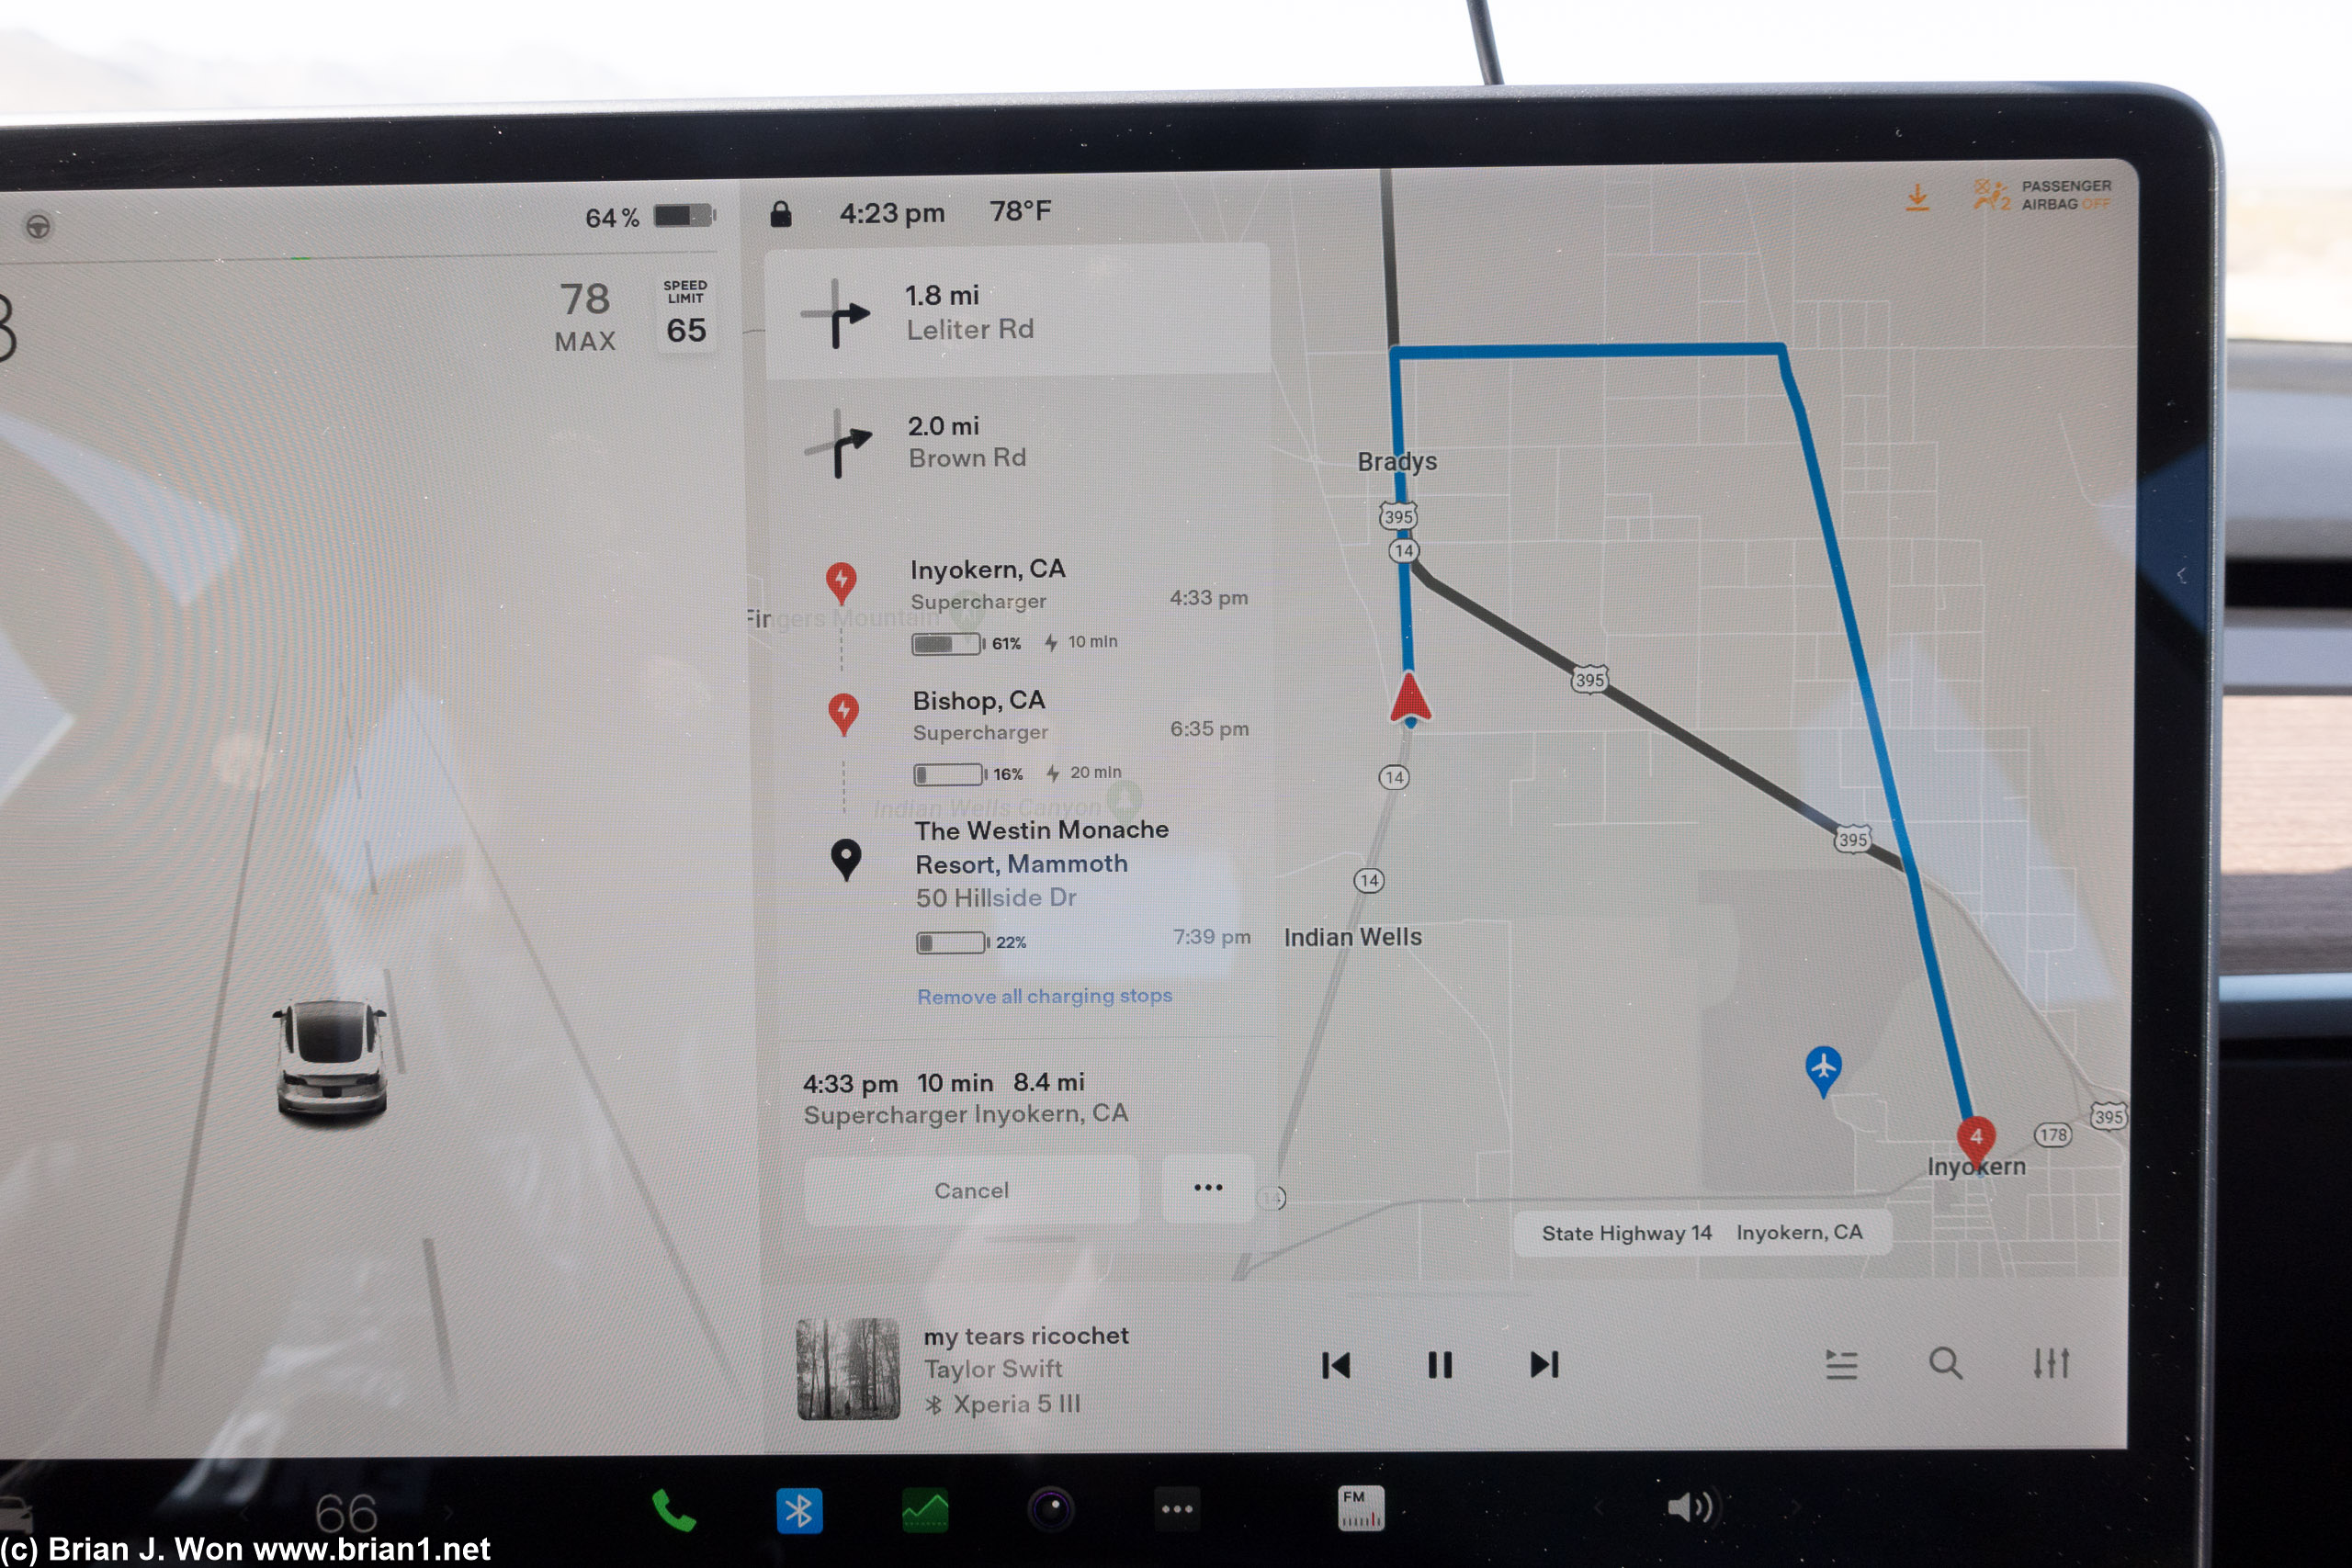 Tesla really wants me to charge in Inyokern.